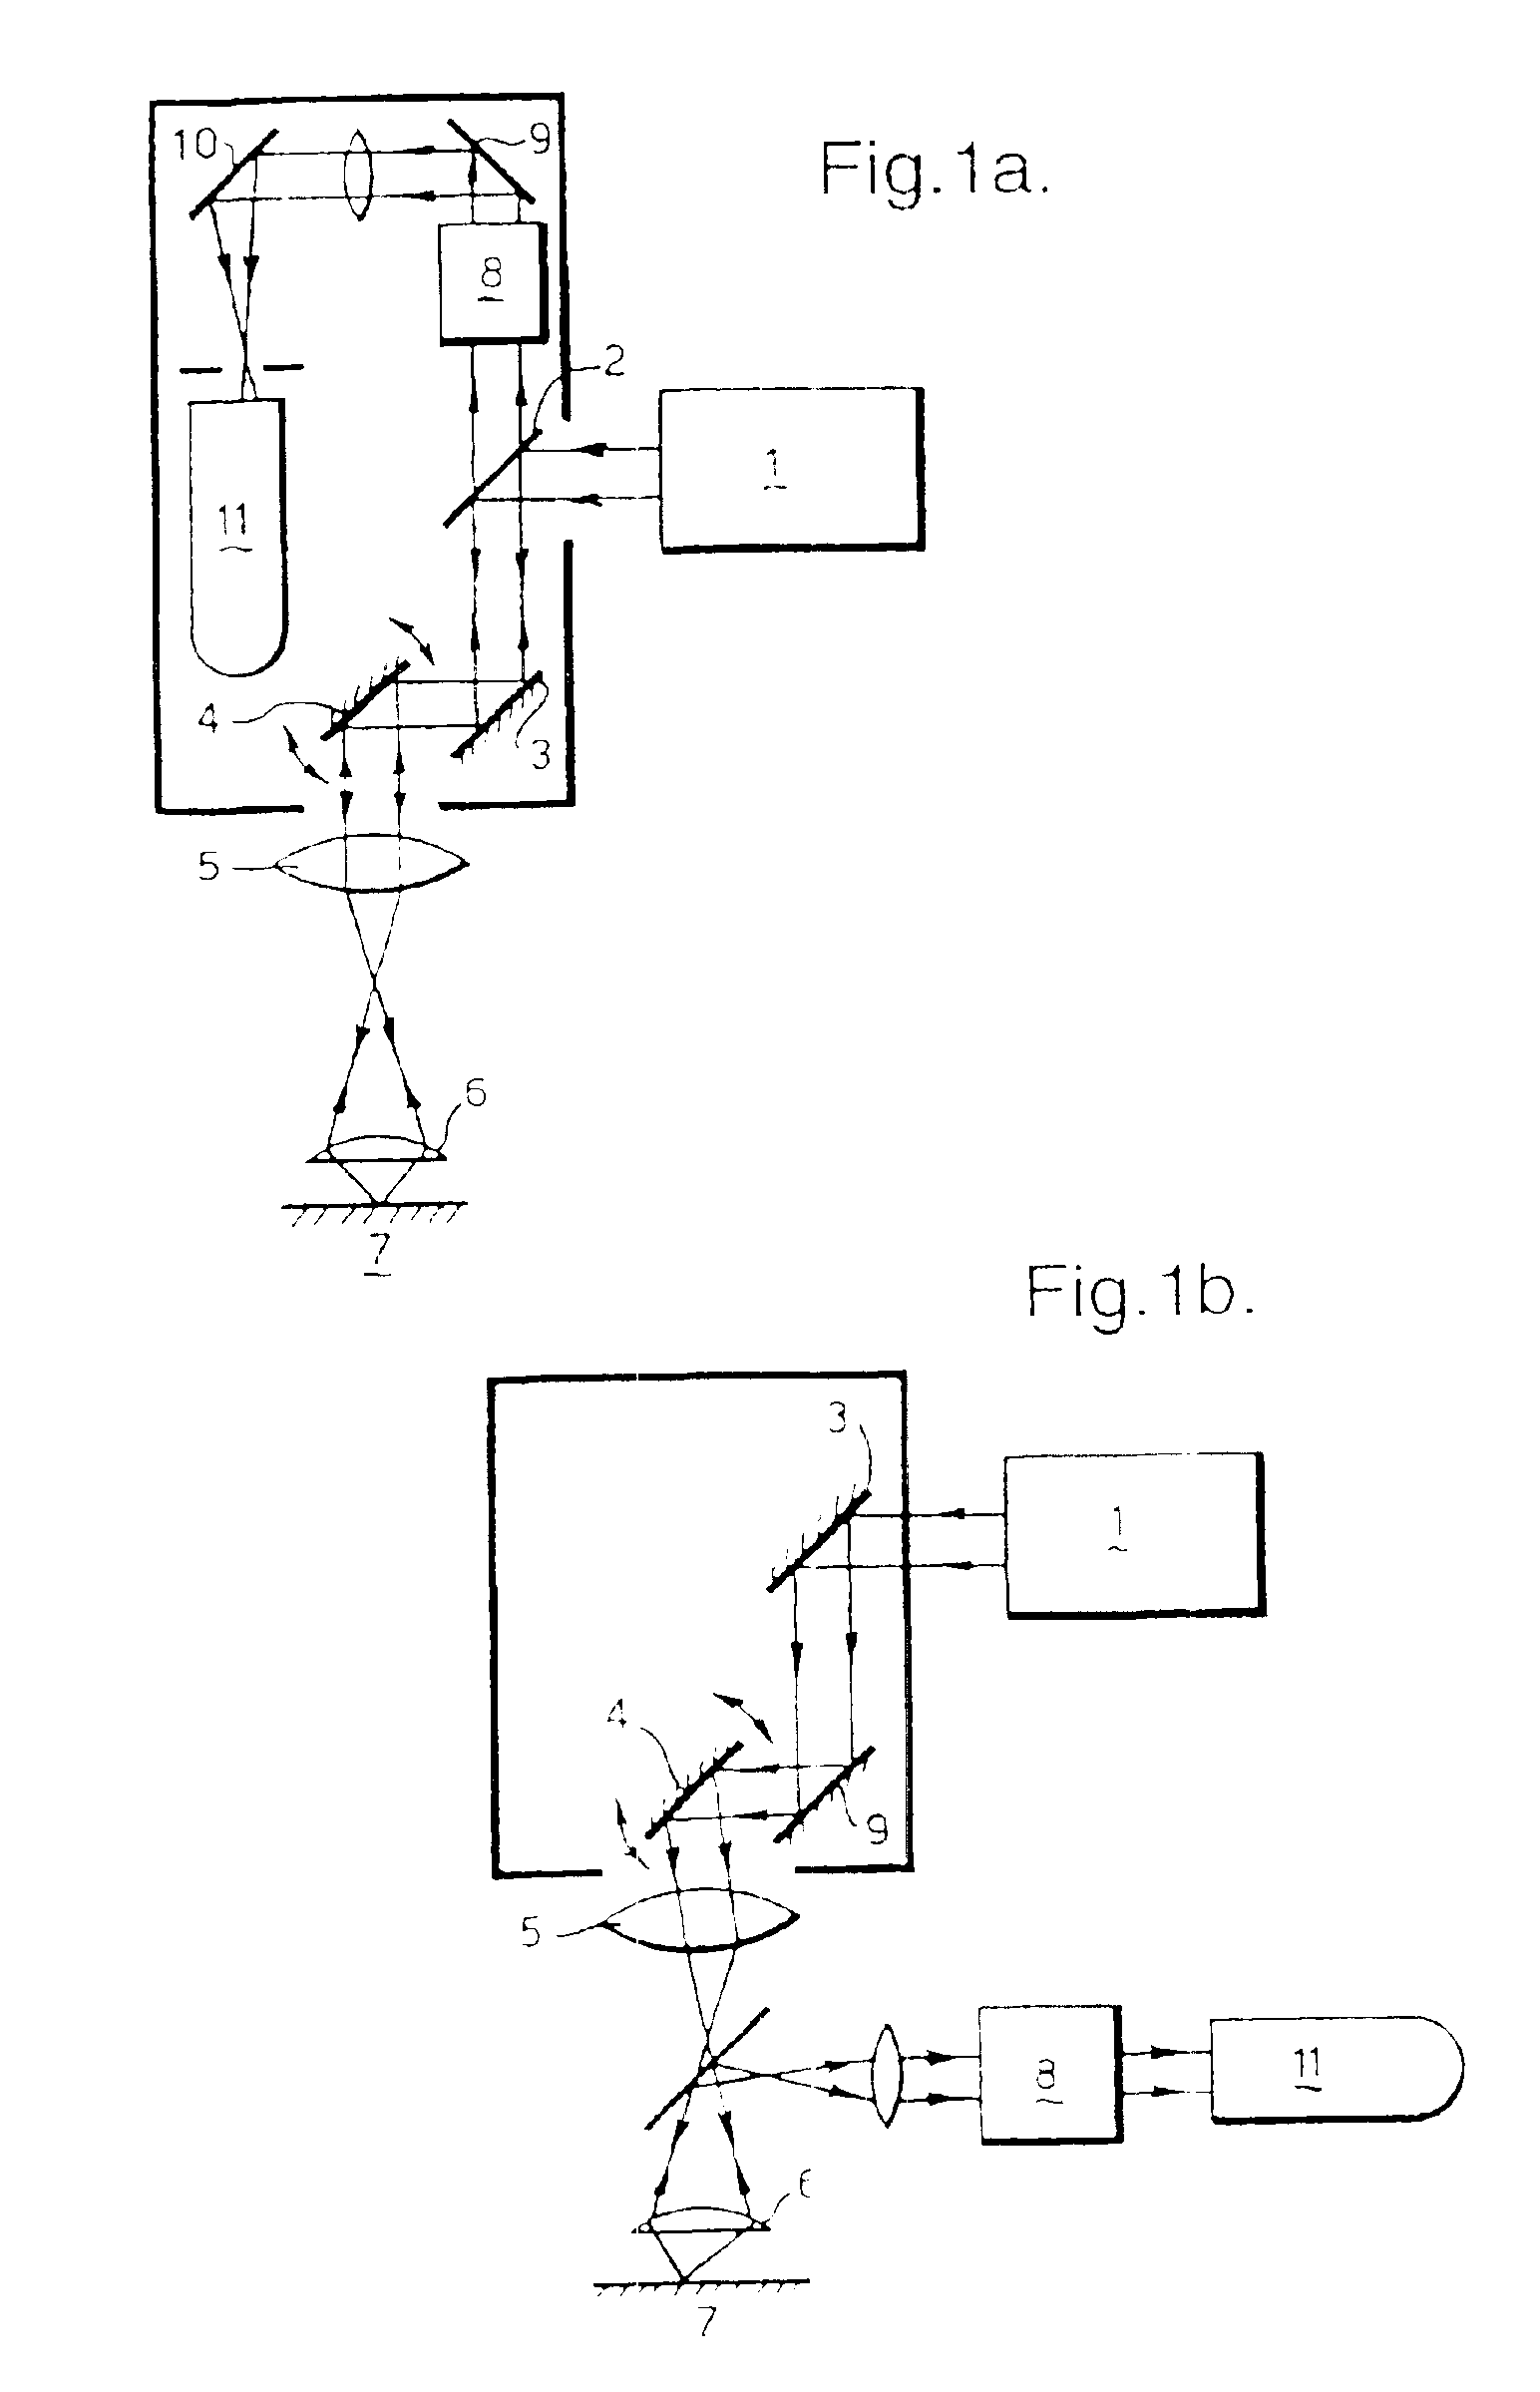 Apparatus and methods for fourier spectral analysis in a scanning spot microscope